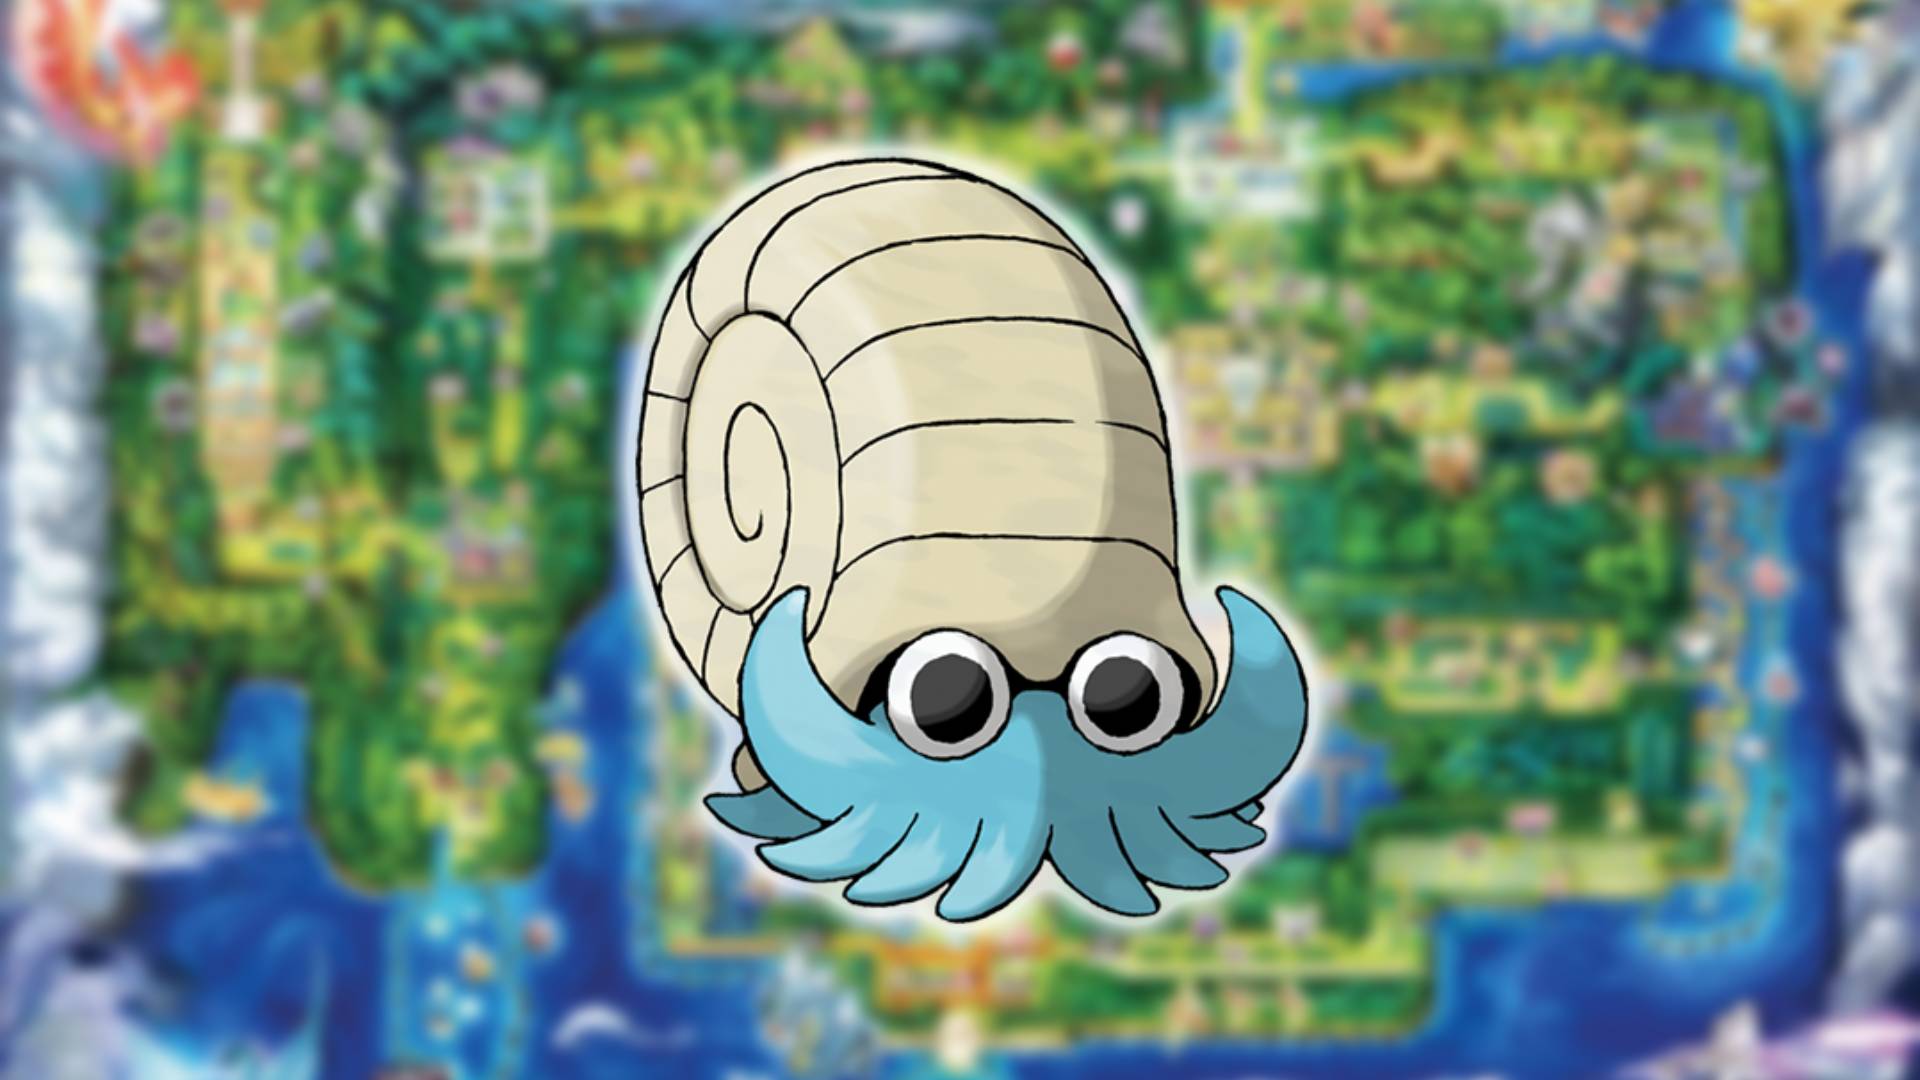  A photo of the Pokemon Omastar, a rock and water type Pokemon that resembles a squid with clam-like spiral shell.